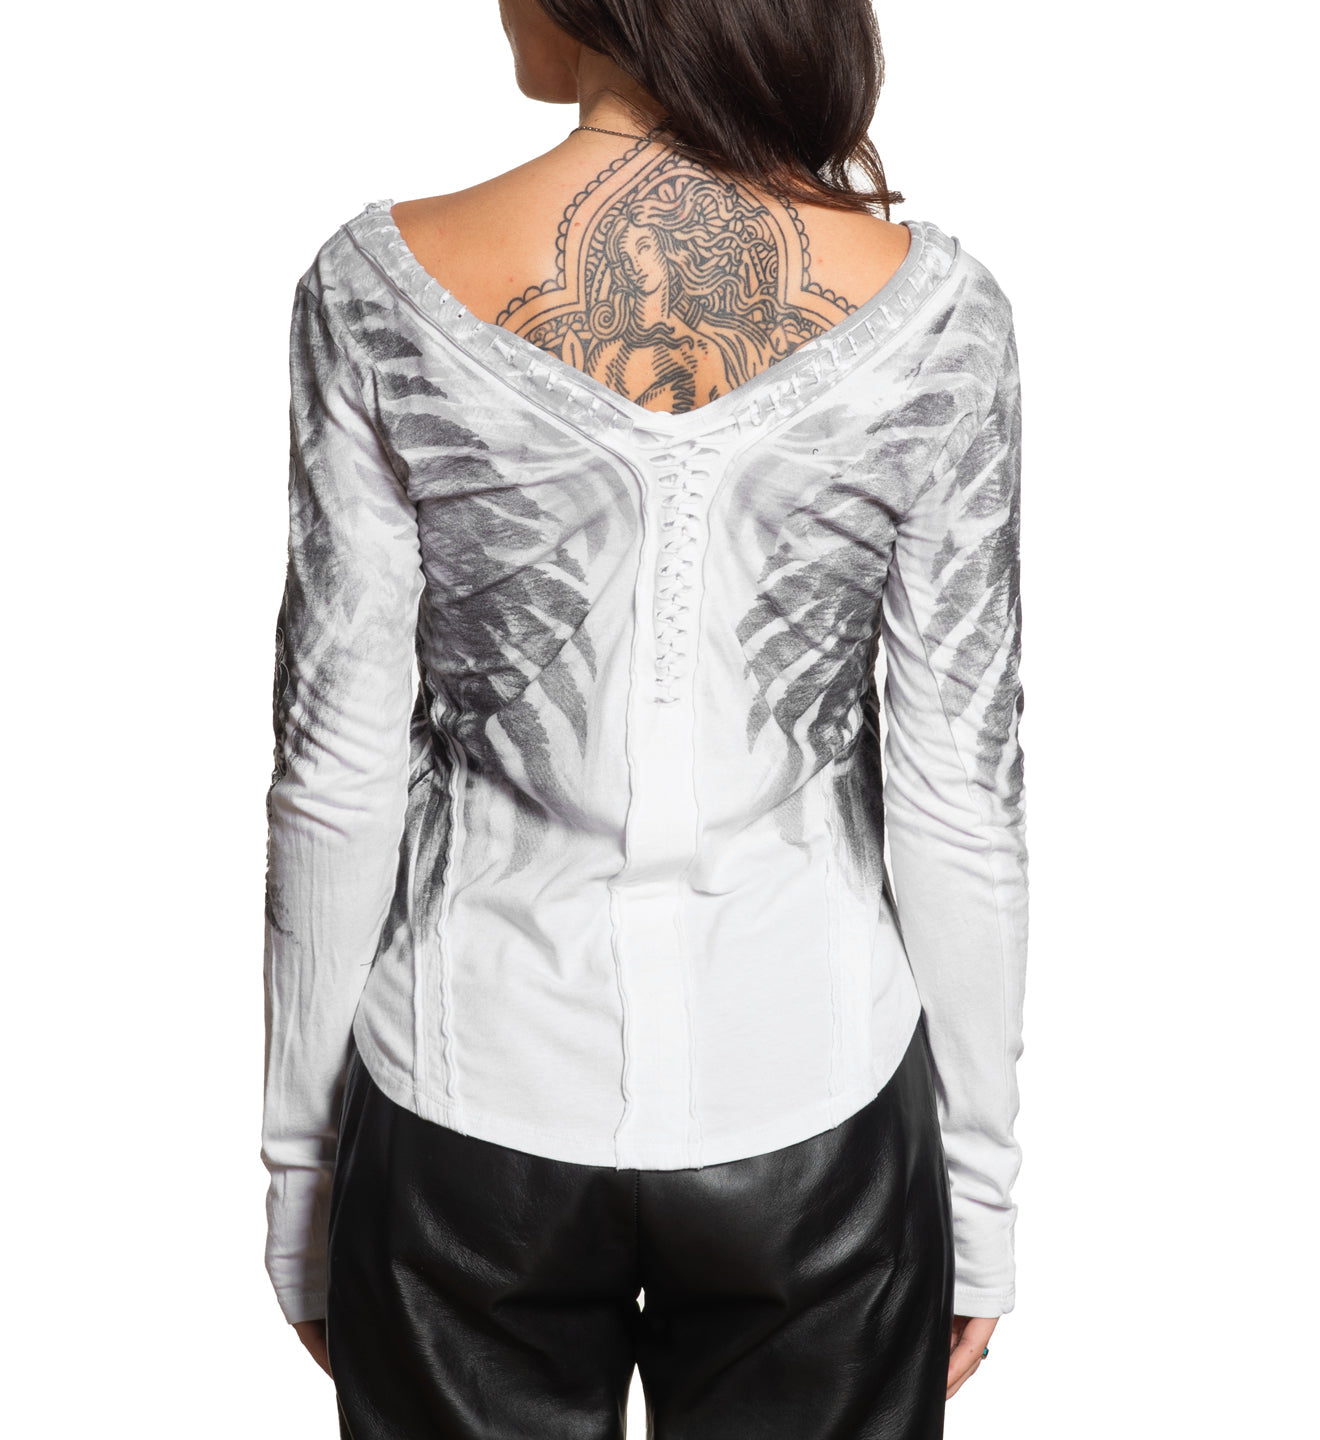 Womens Womens Woven And Fashion Tops - Paradigm